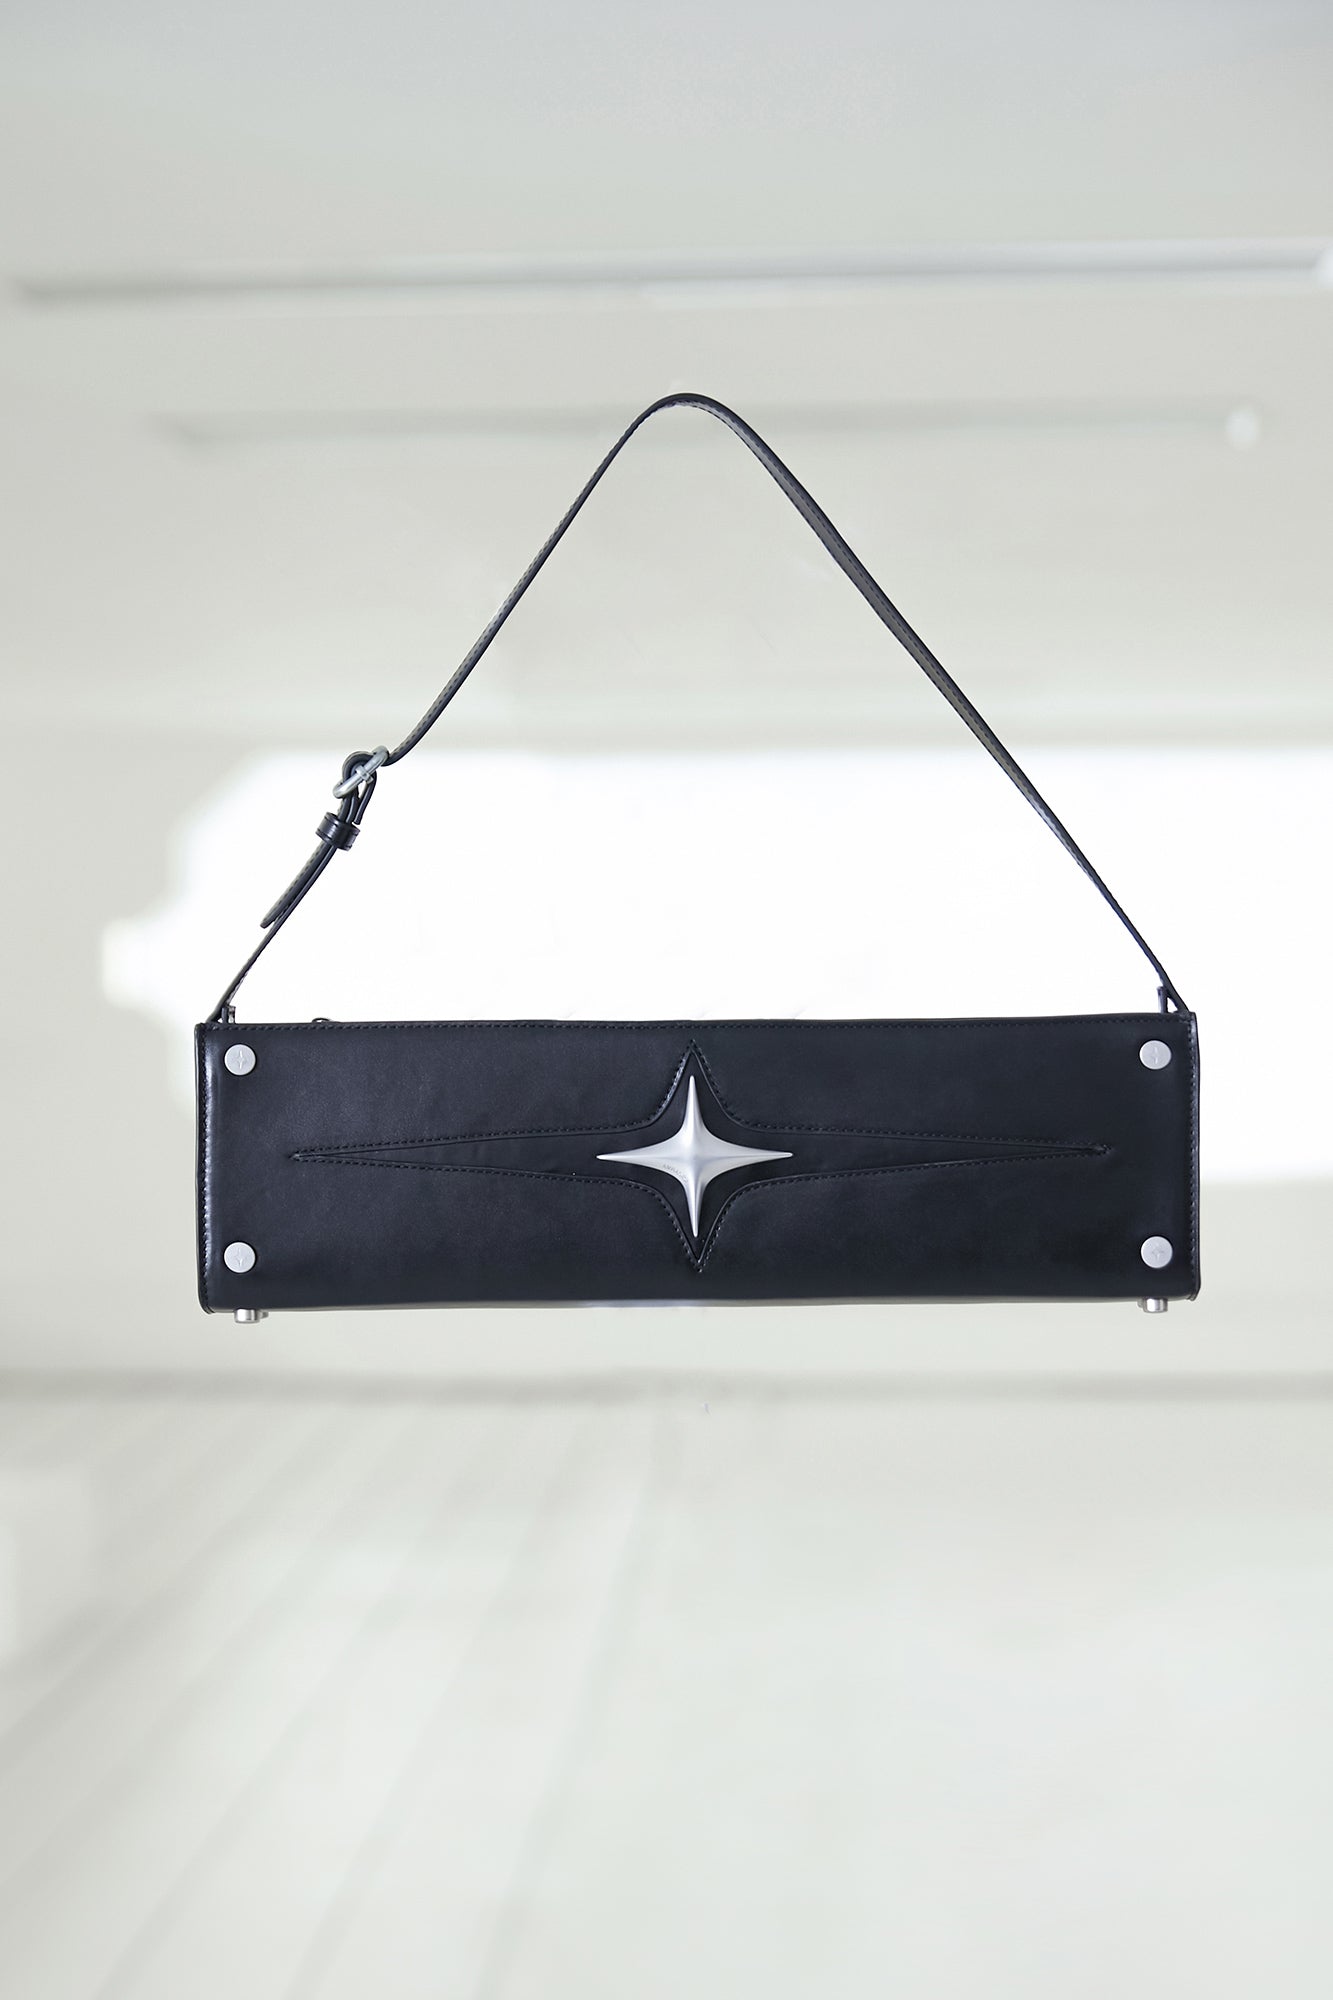 Leather three-dimensional meteor bag